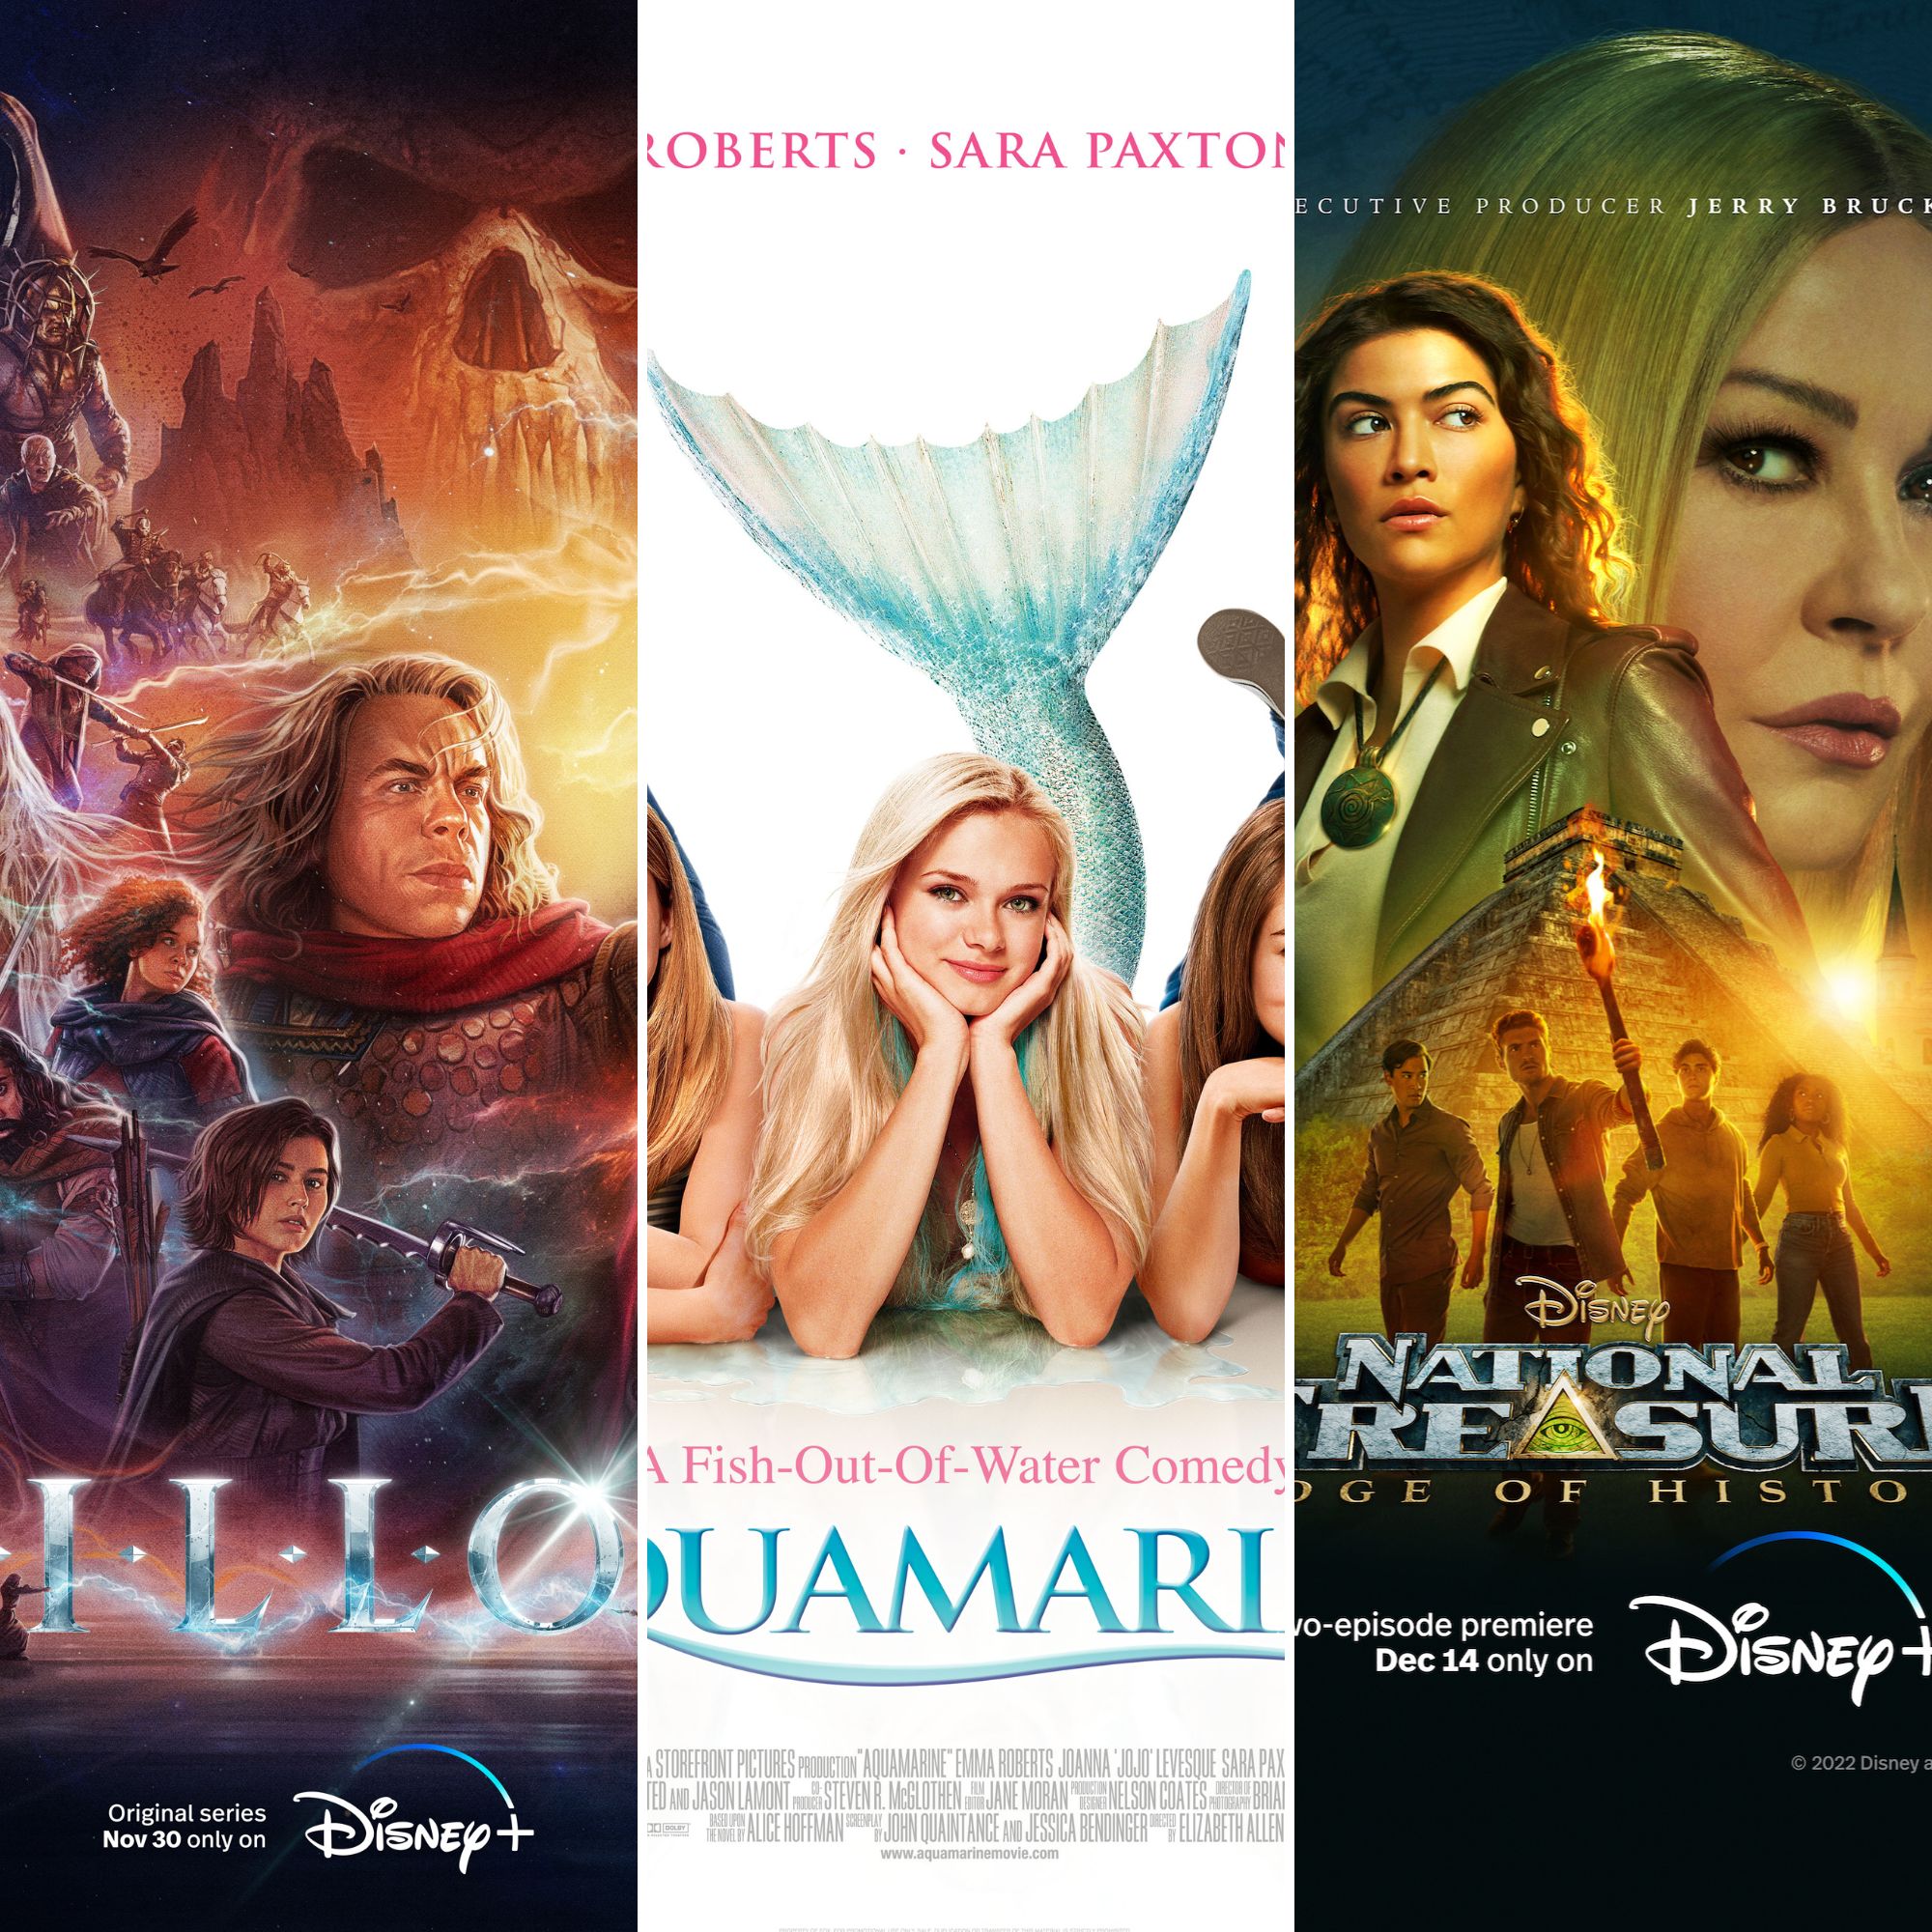 Christmas 2022 movies: Full list of Disney+ films to watch this